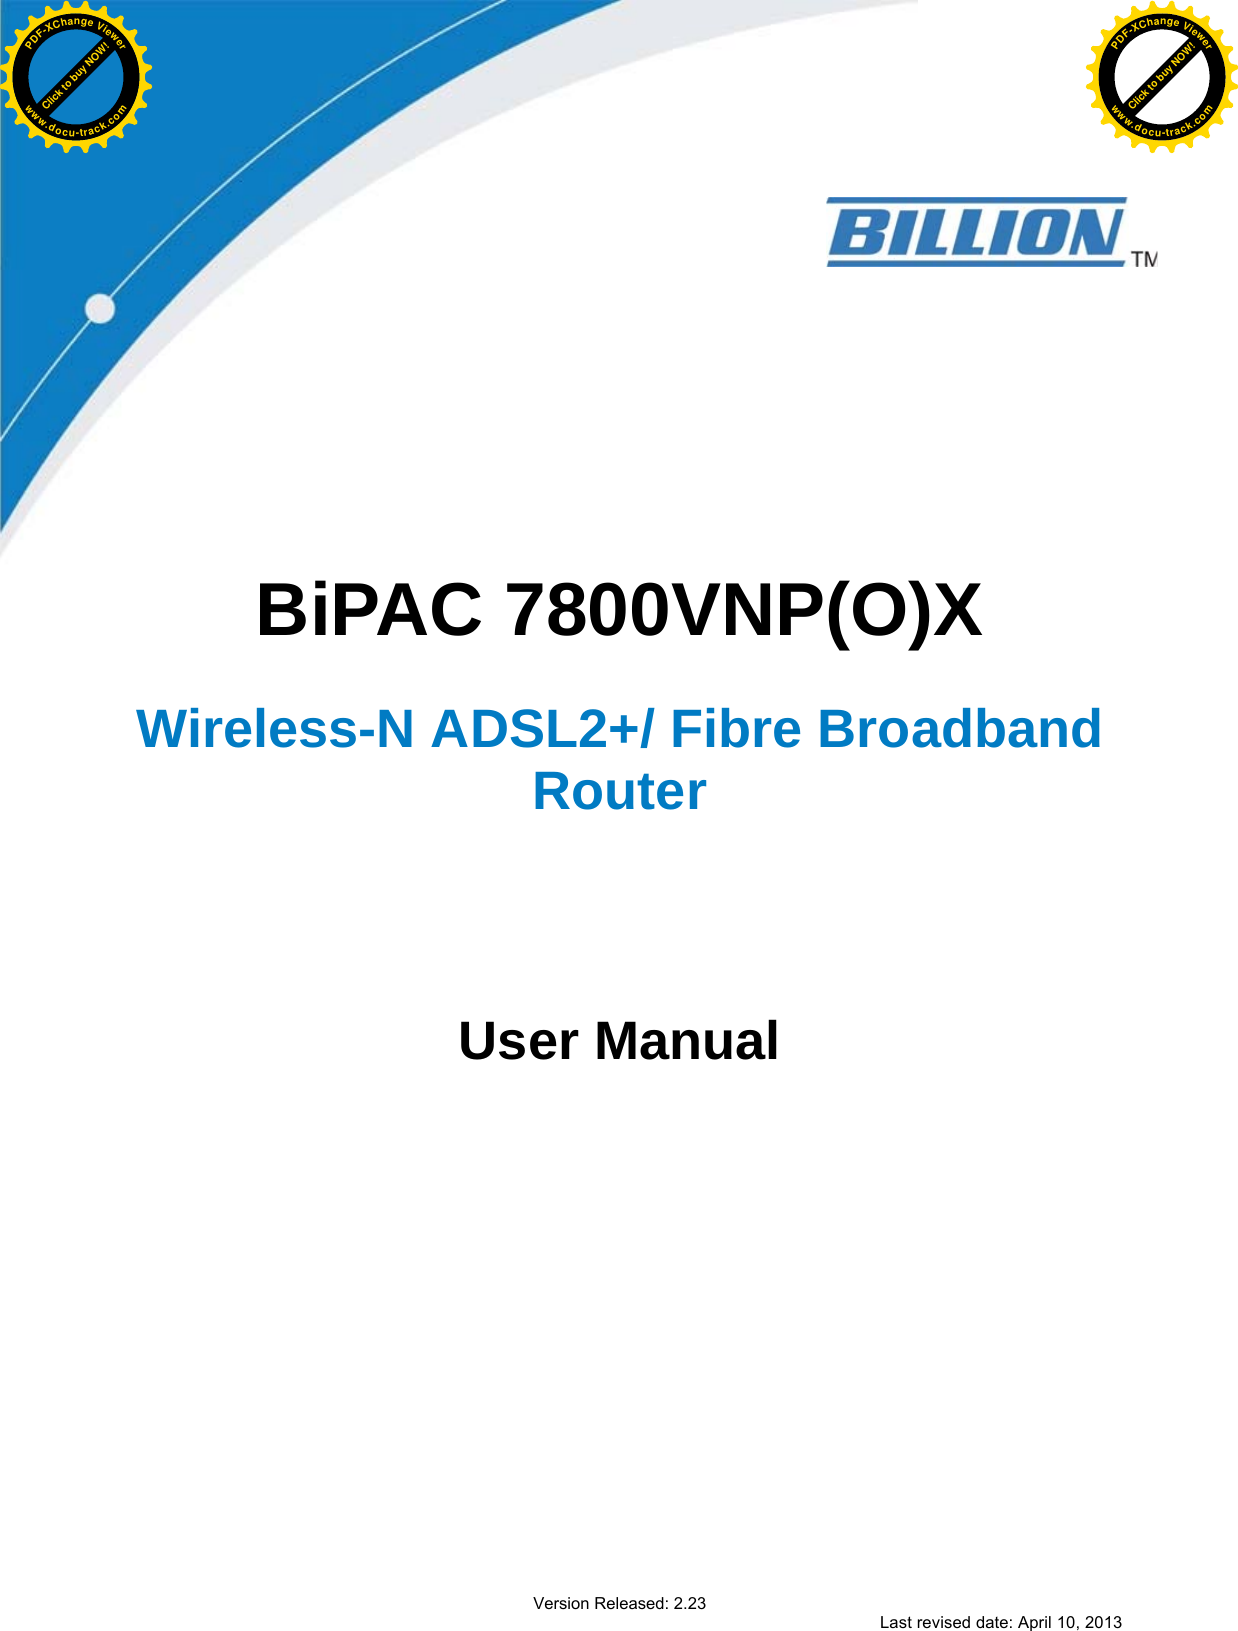                  BiPAC 7800VNP(O)X   Wireless-N ADSL2+/ Fibre Broadband Router          User Manual                          Version Released: 2.23 Last revised date: April 10, 2013 Click to buy NOW!PDF-XChange Viewerwww.docu-track.comClick to buy NOW!PDF-XChange Viewerwww.docu-track.com